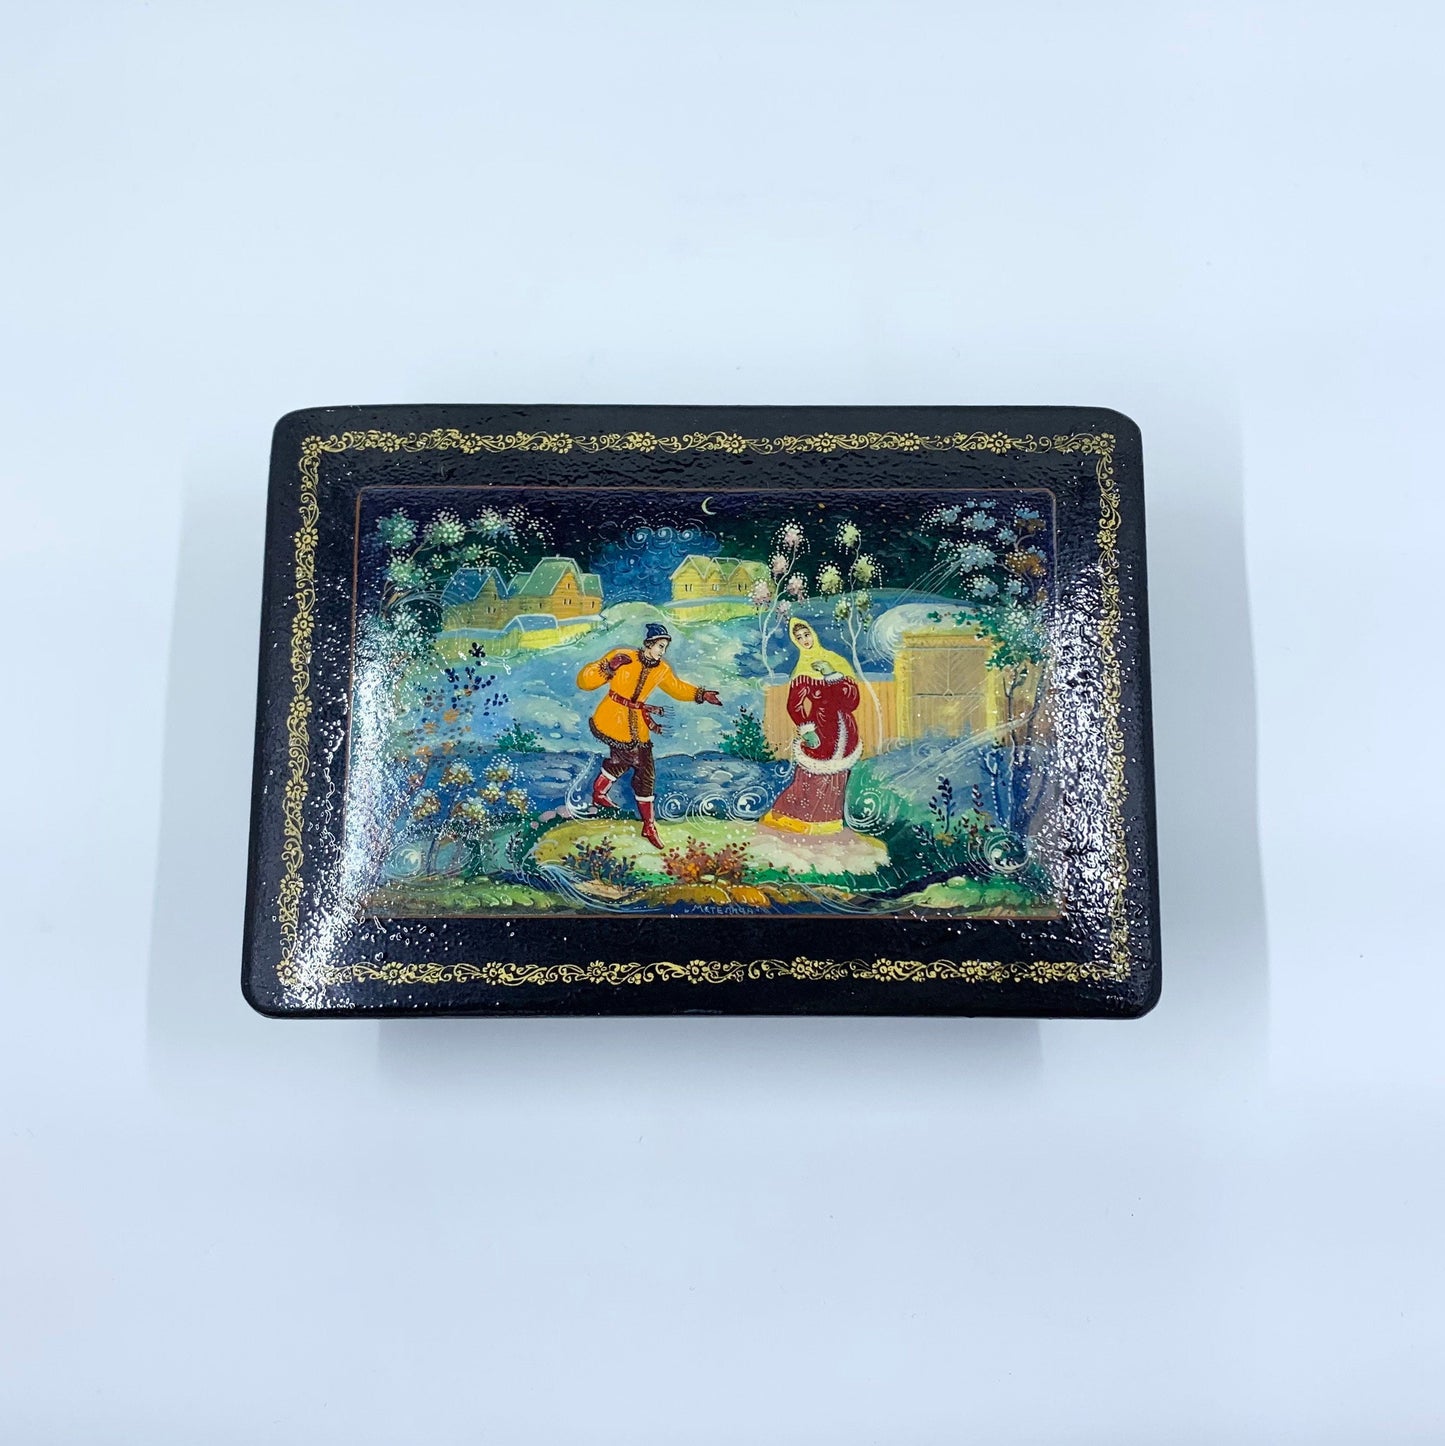 Vintage Russian Lacquer Box | Miniature Hand Painted Box | 1970's USSR Lacquer Box | Maiden Fairy Tale Scene